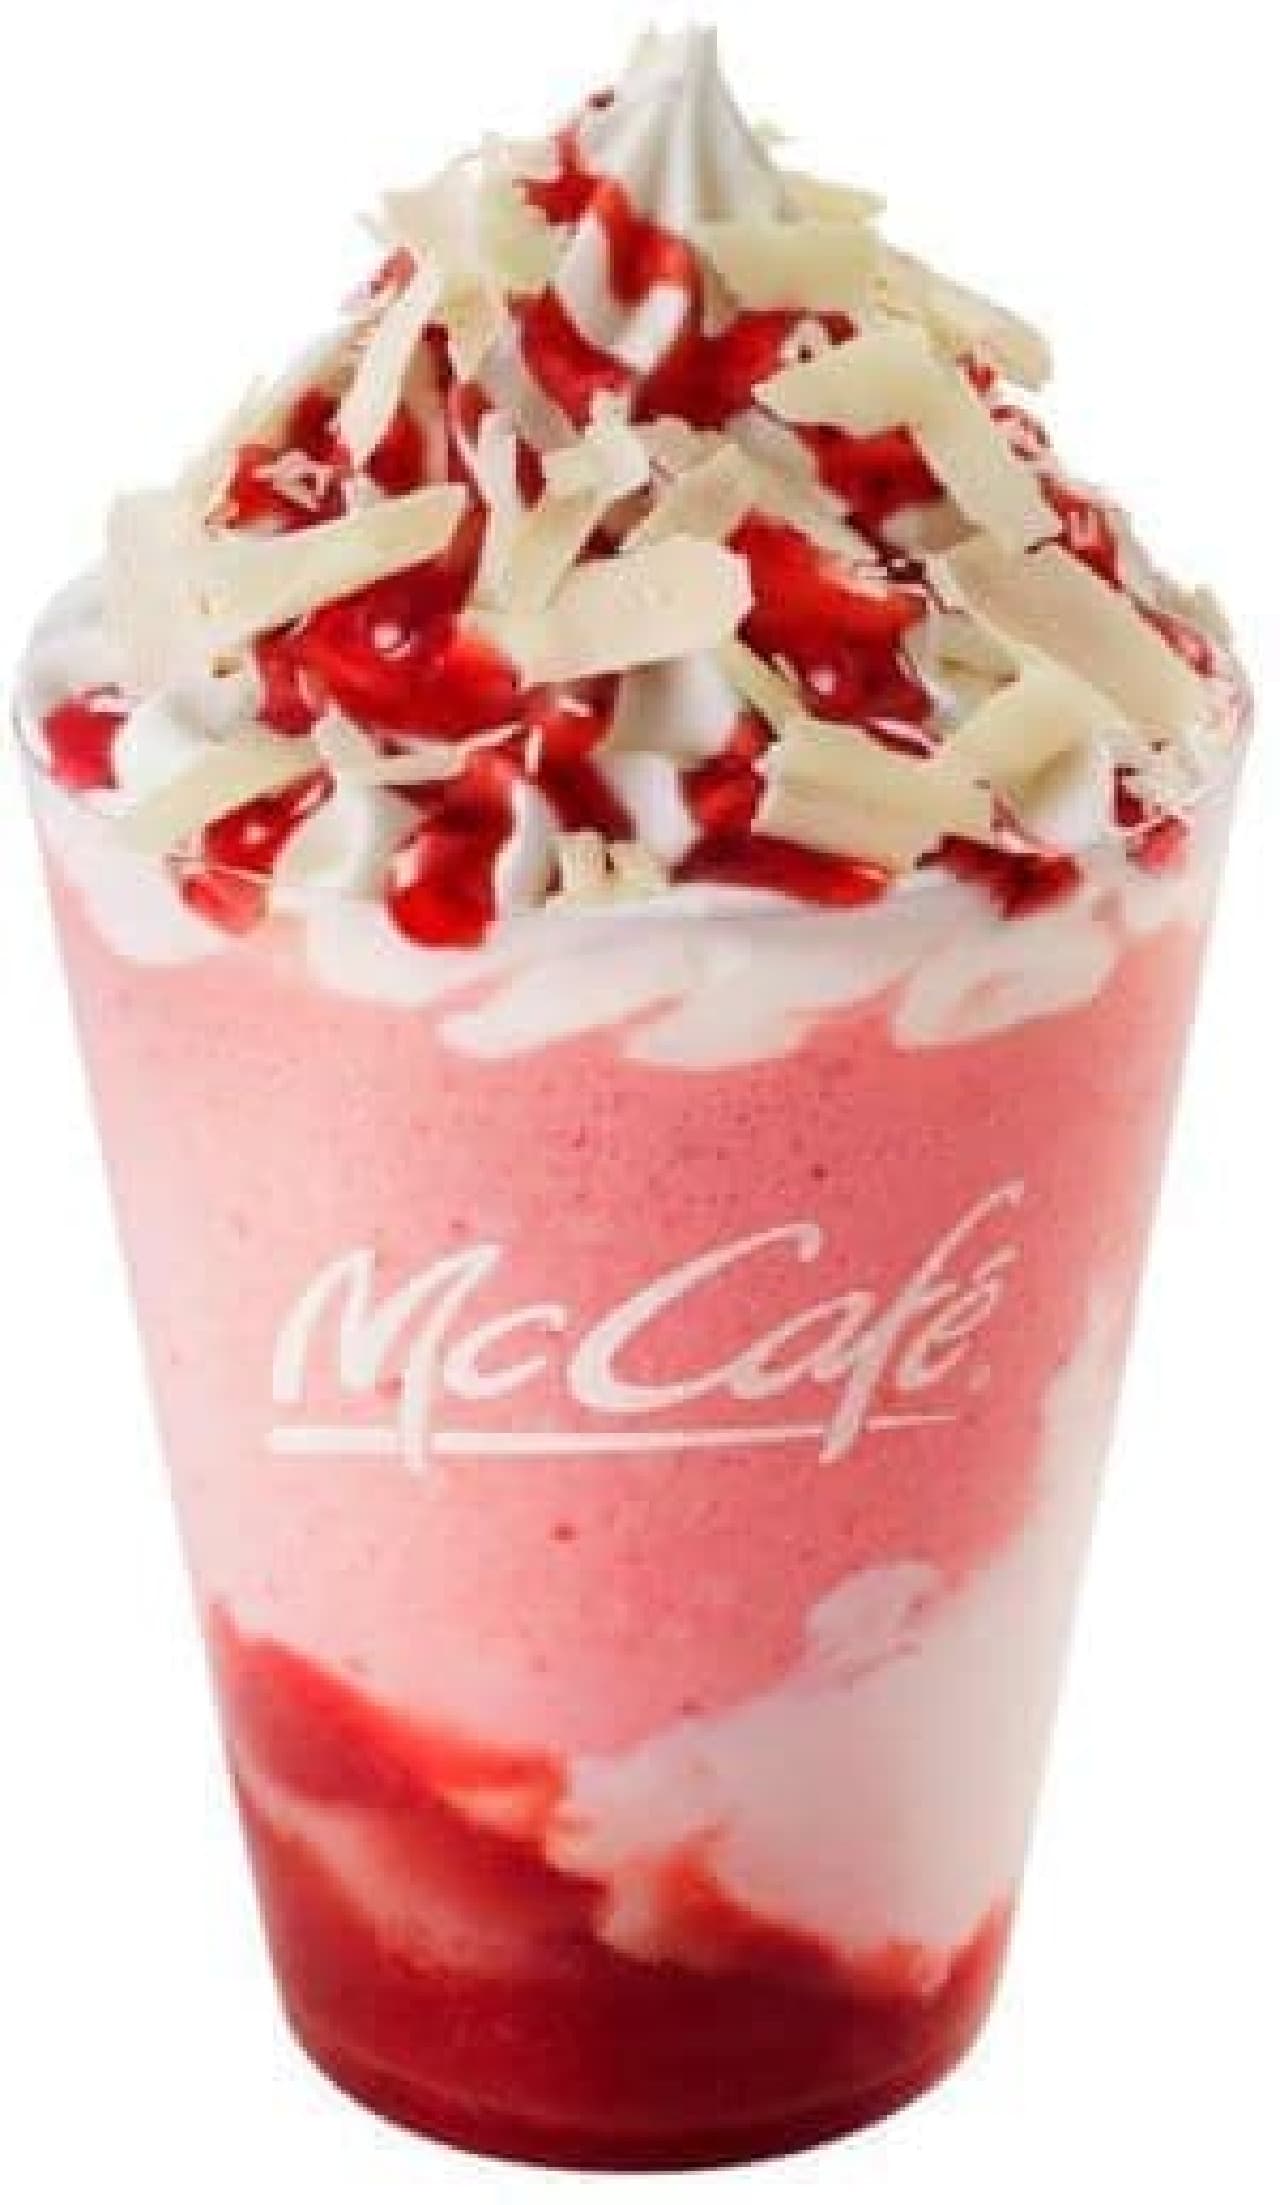 A sweet and sweet strawberry drink at McCafé